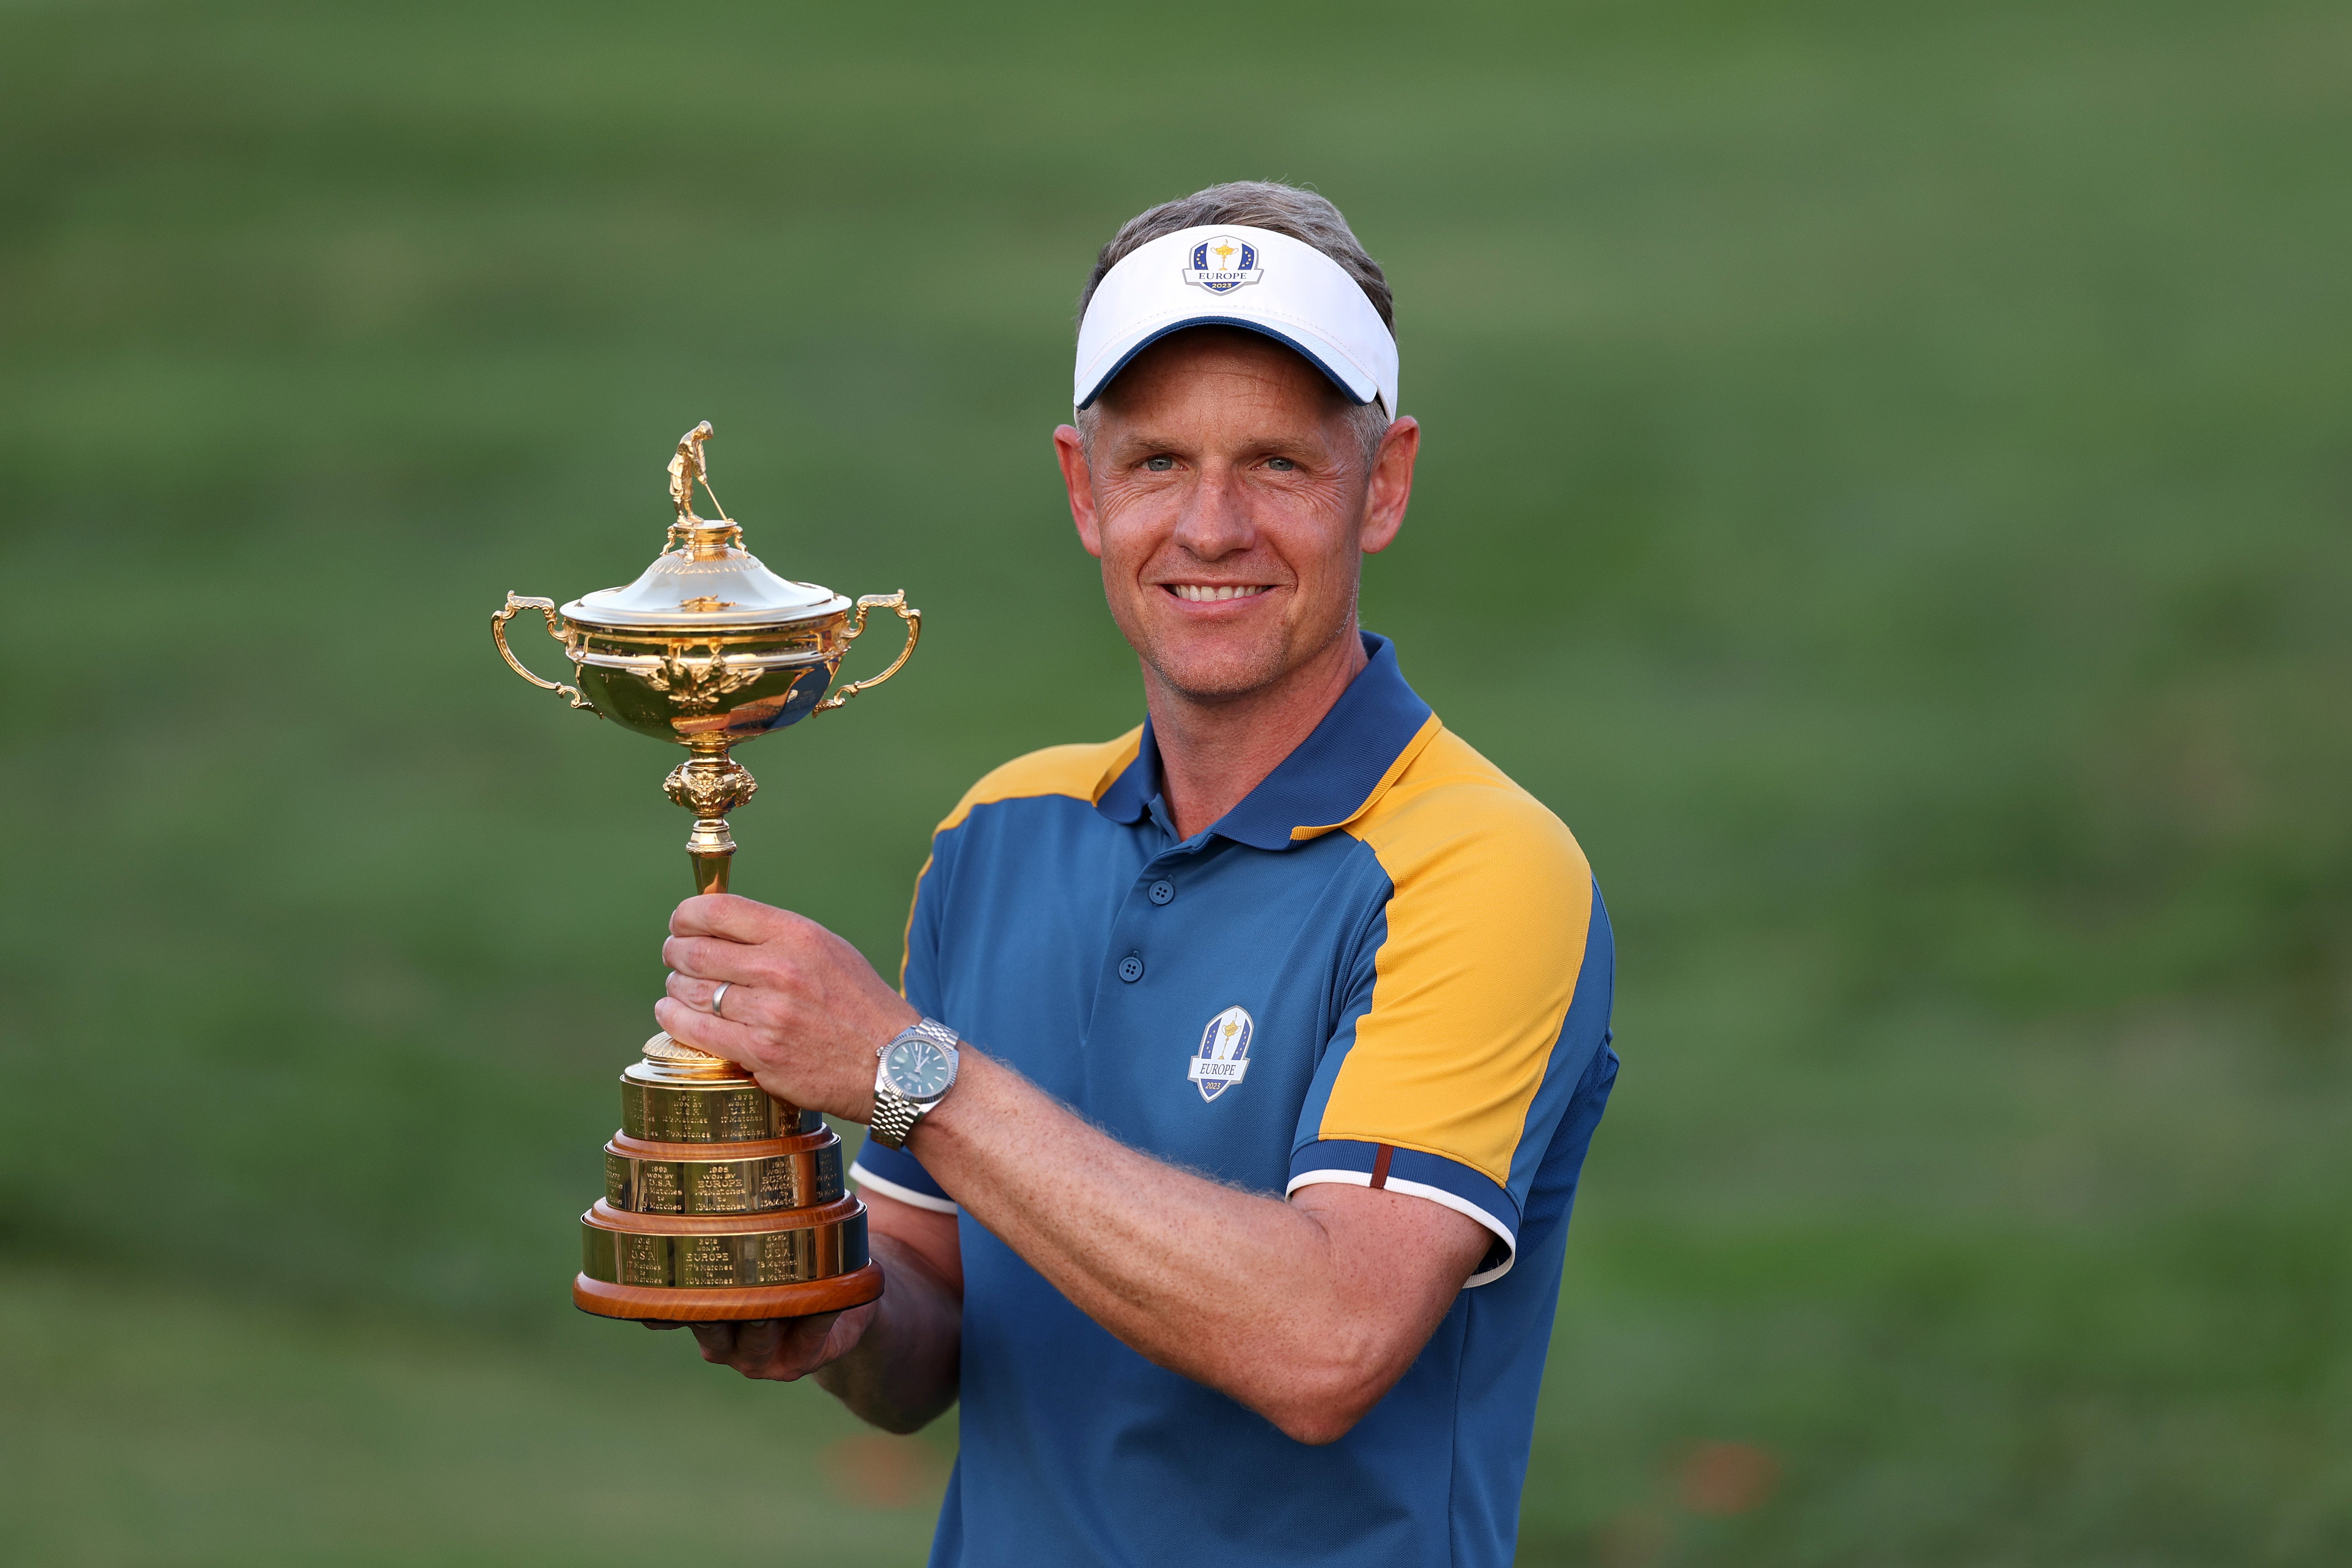 Luke Donald led Europe to victory over the USA in Rome